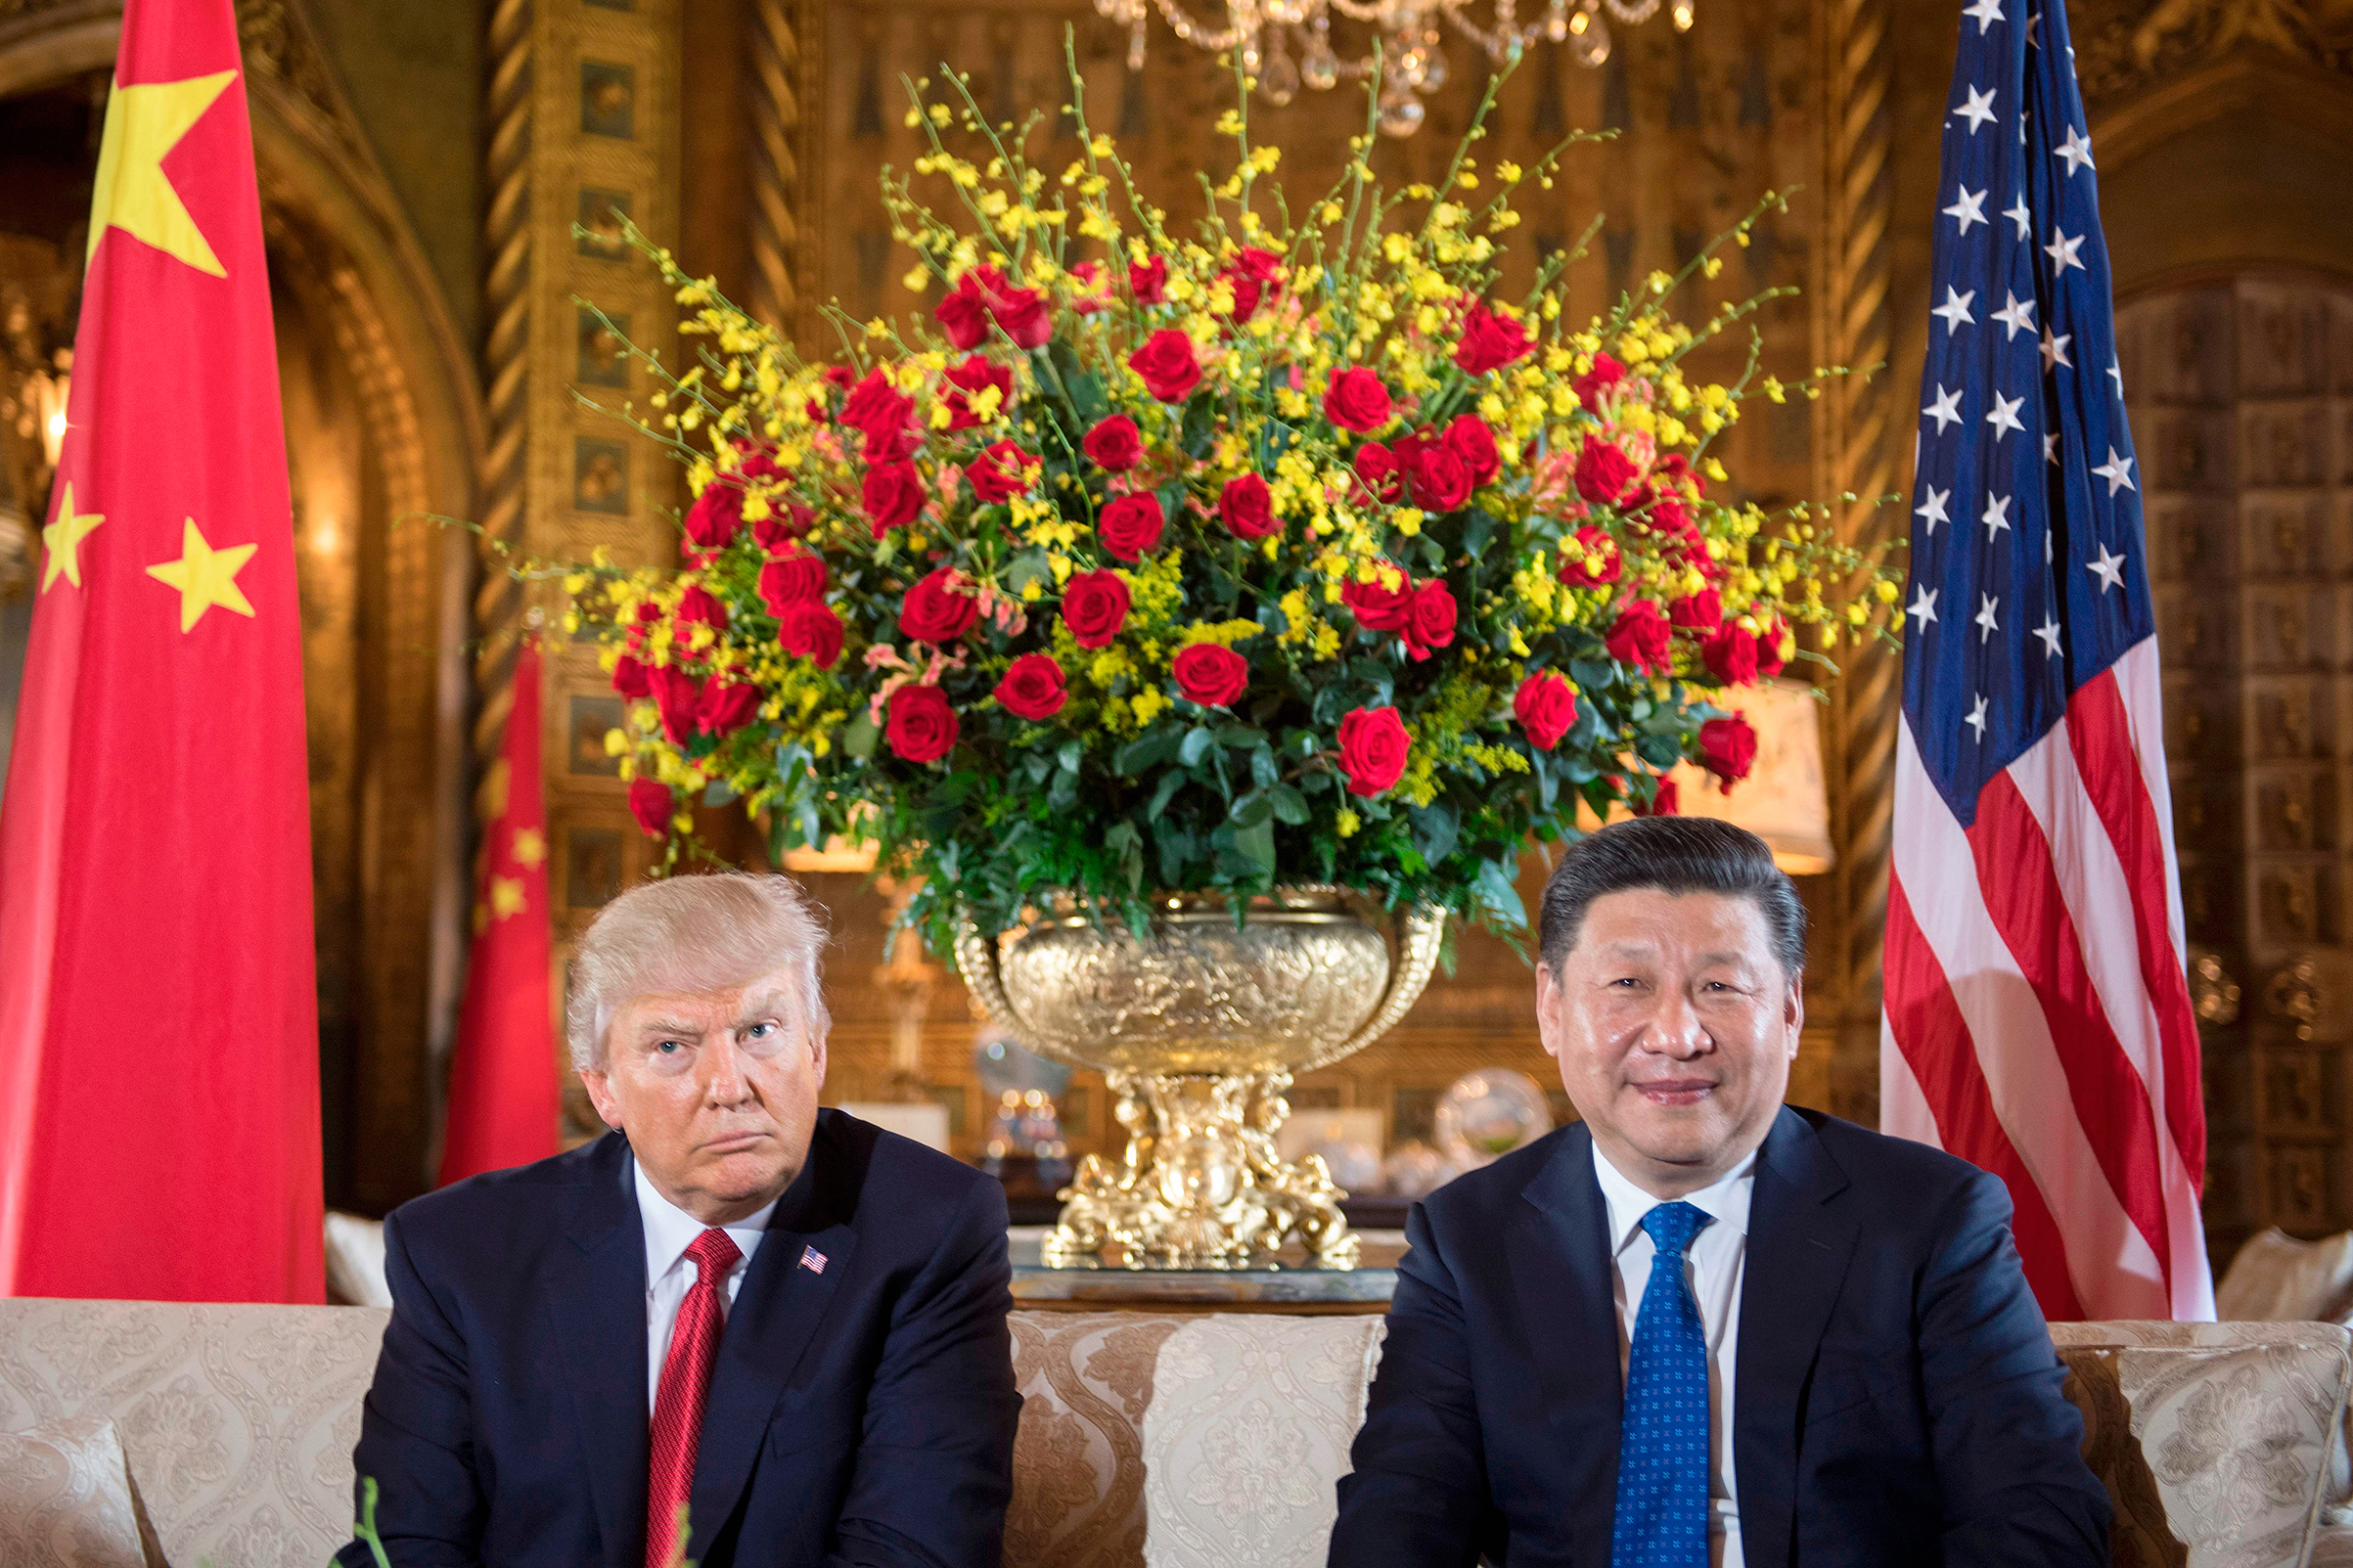 Global side-eye: Trump and Xi’s relationship has grown more tense since meeting at Mar-a-Lago earlier this year (Jim Watson—AFP/Getty Images)